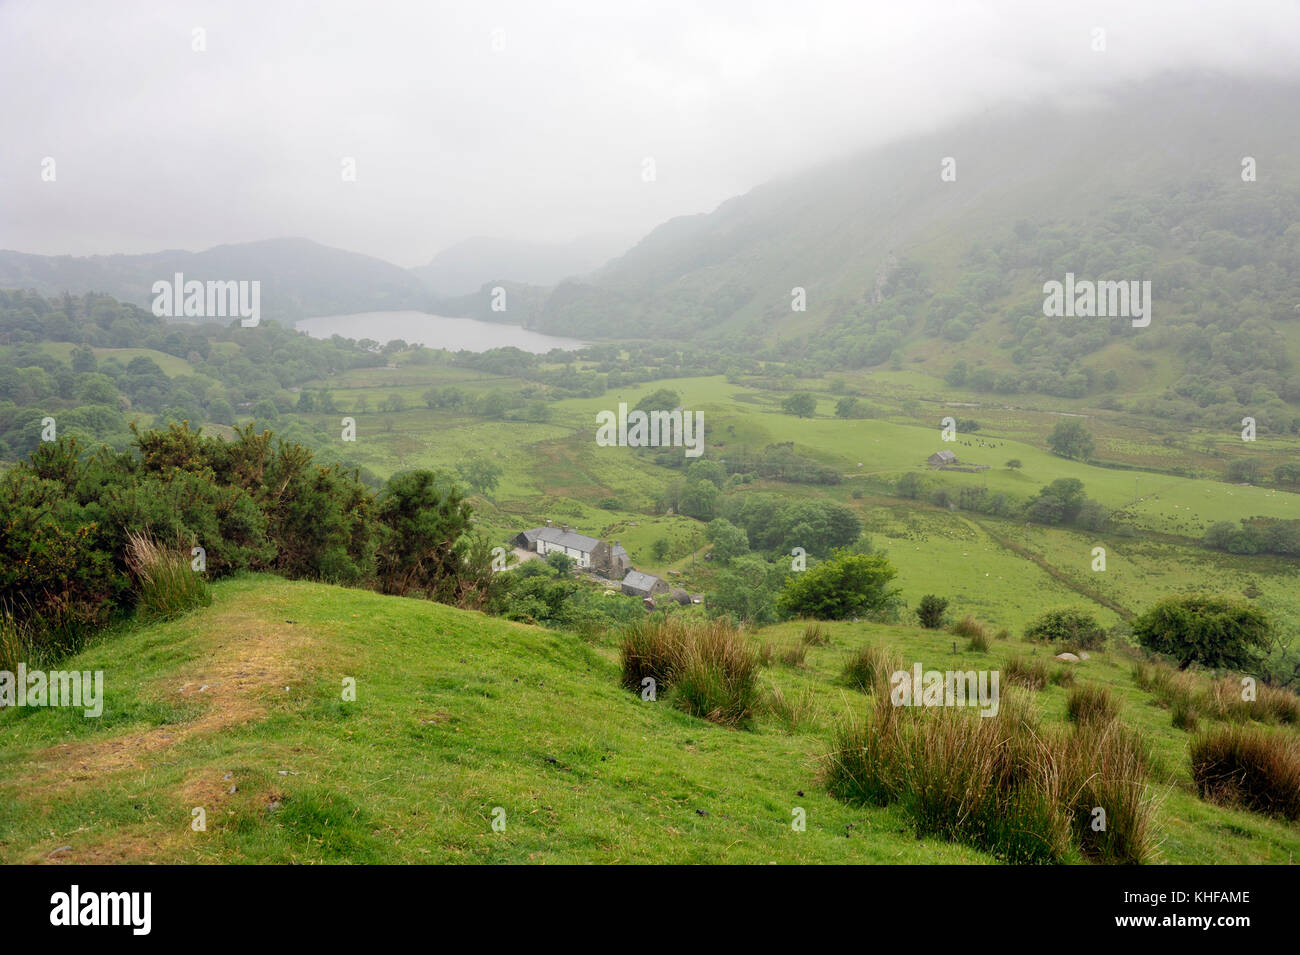 Misty morning looking south along Nant Gwynant Valley with the lake Llyn Gwynant, in the Snowdonia National Park, North Wales, UK. Stock Photo